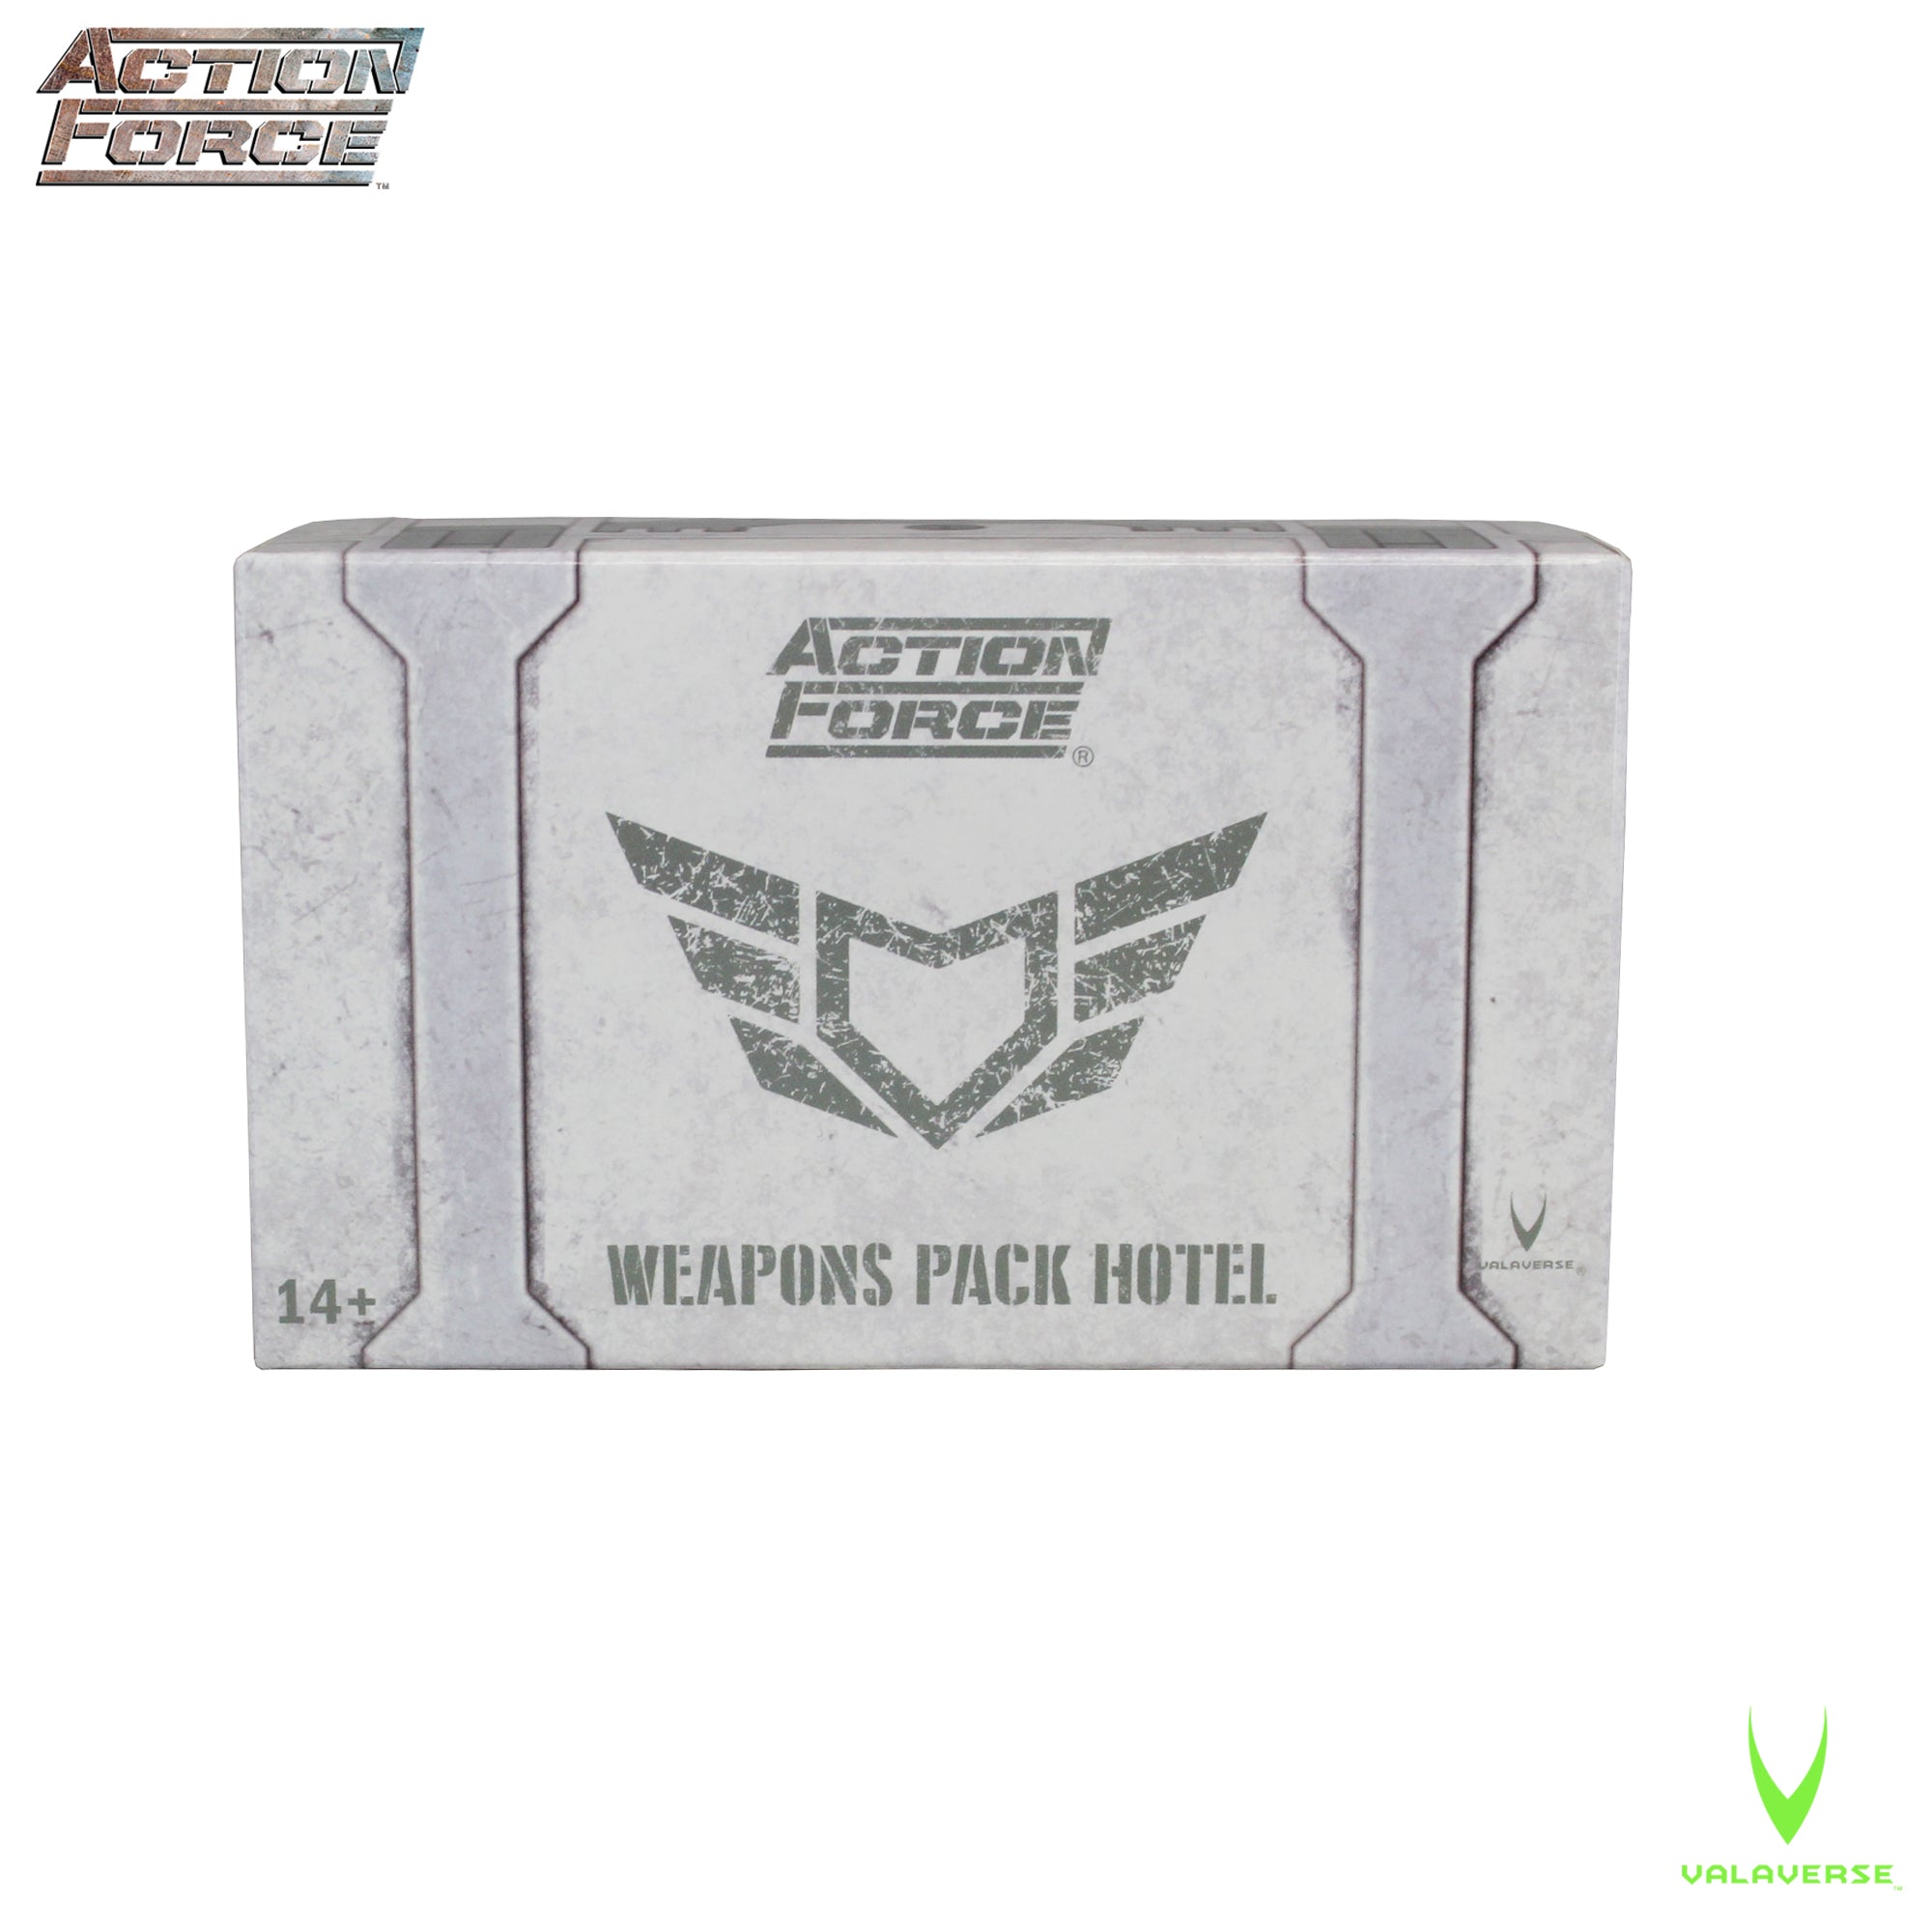 Weapons Pack Hotel - Series 4